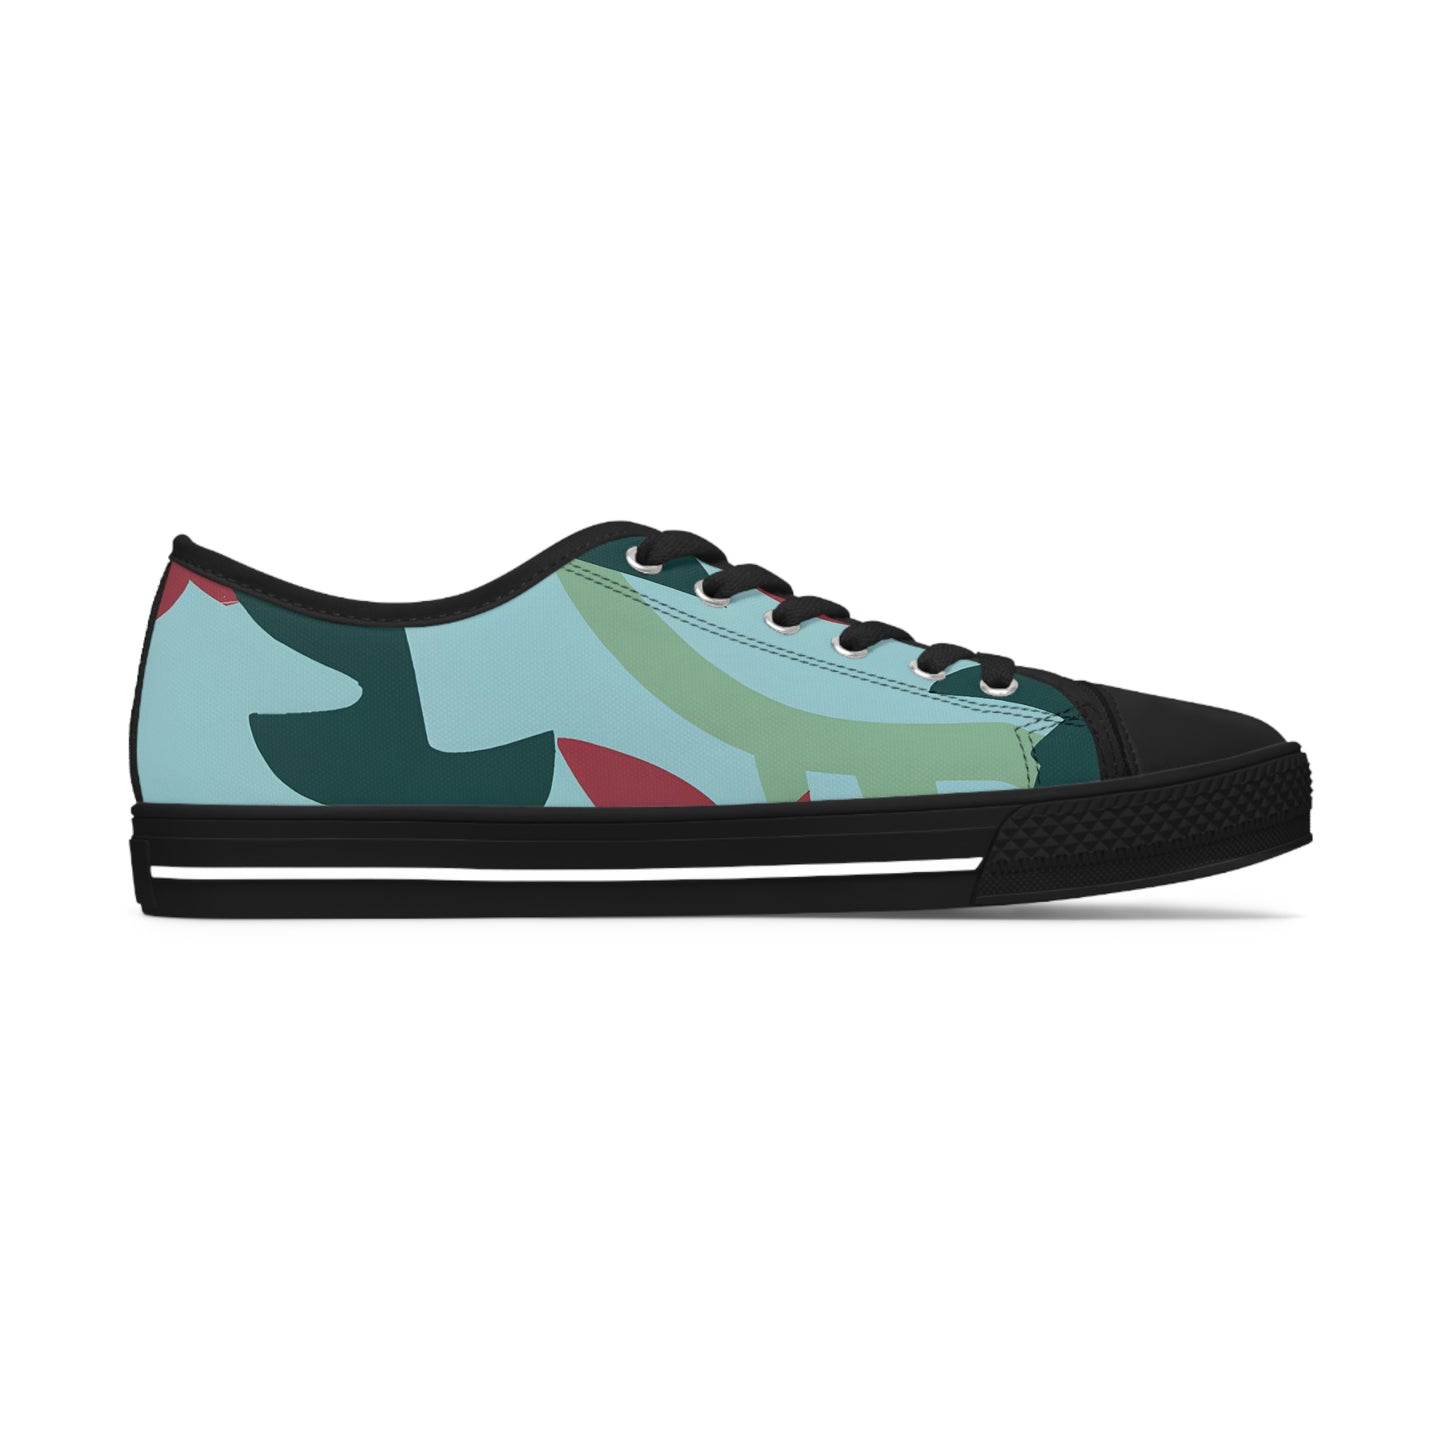 Chaparral Ione - Women's Low-Top Sneakers